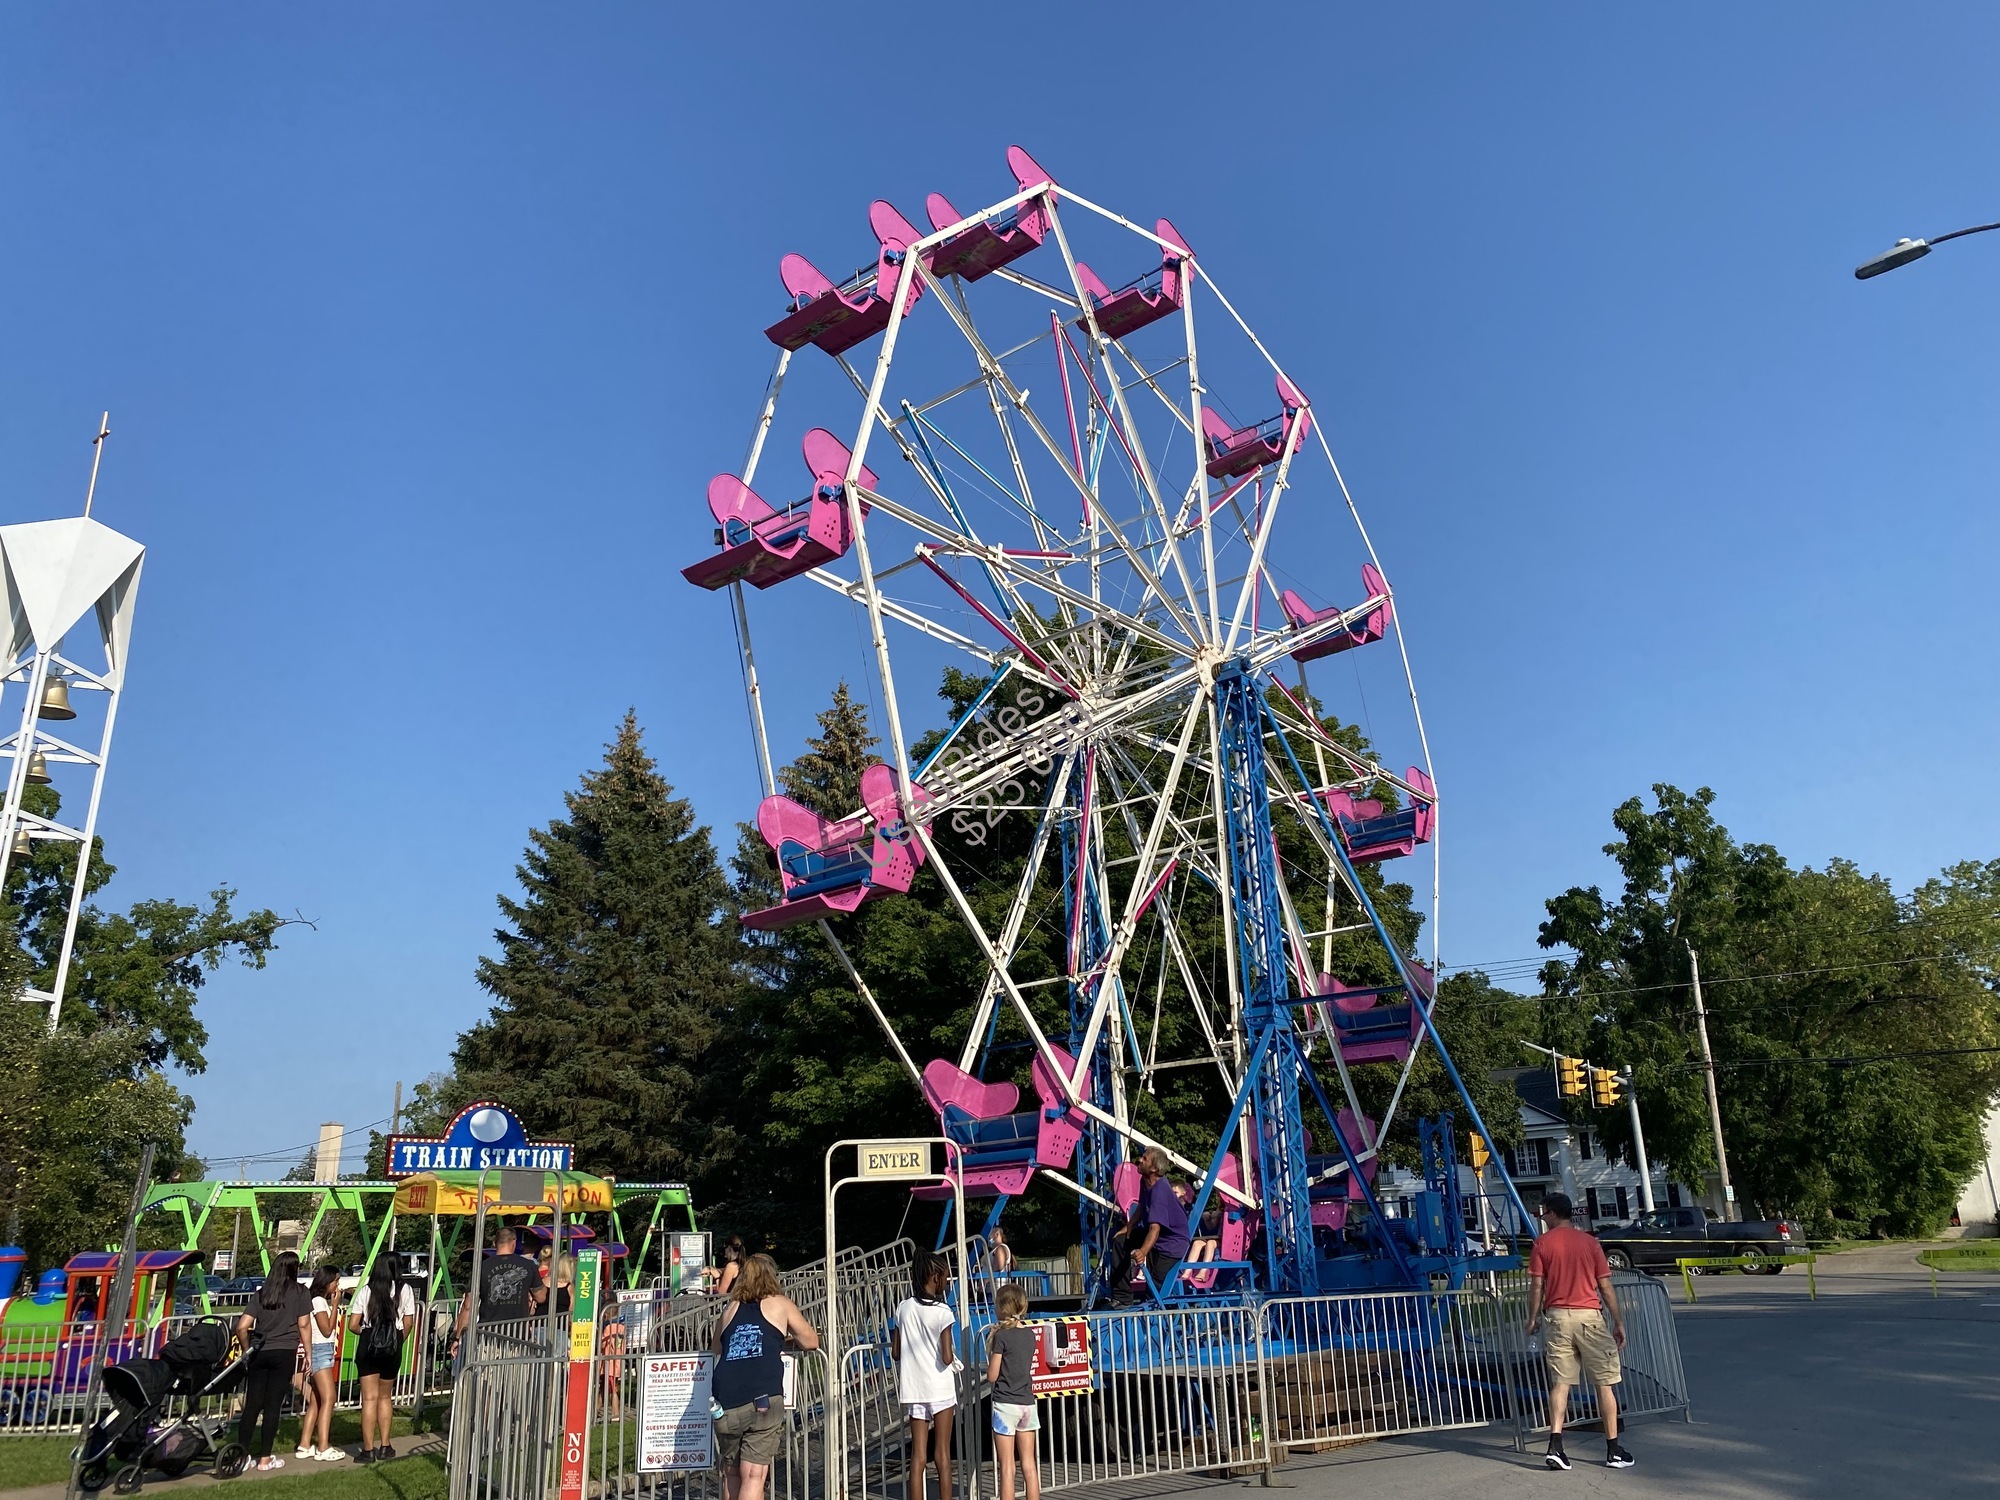 carnival ride rentals clarksville indiana